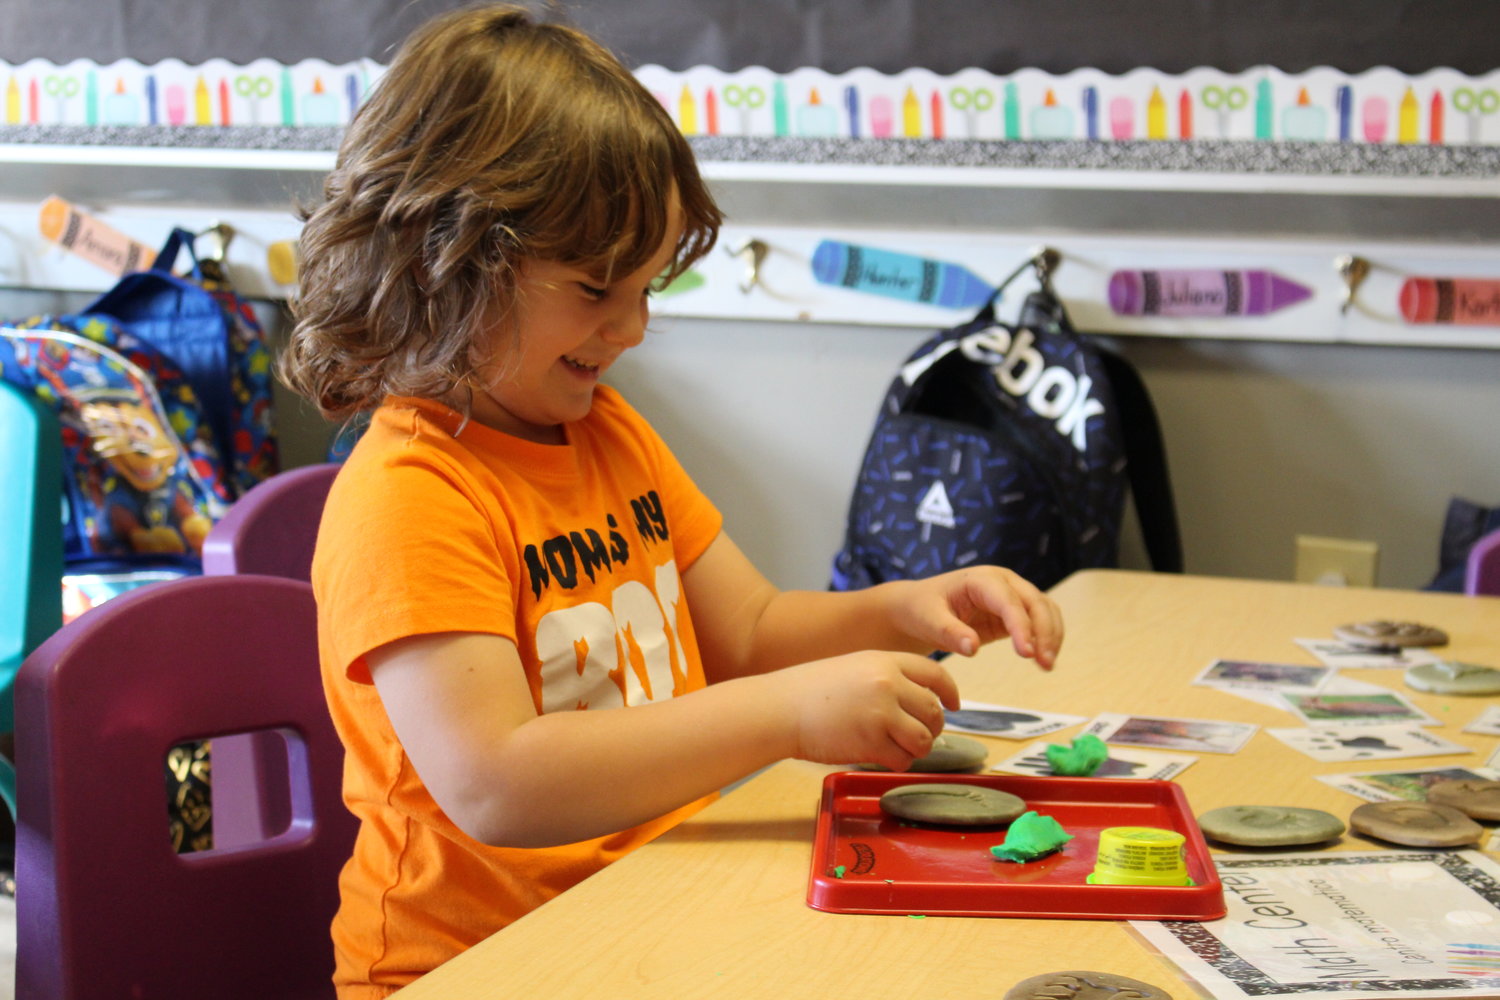 The preschool curriculum was developed in collaboration with the current kindergarten teachers to ensure students have the skills they need to succeed when they enter elementary school.